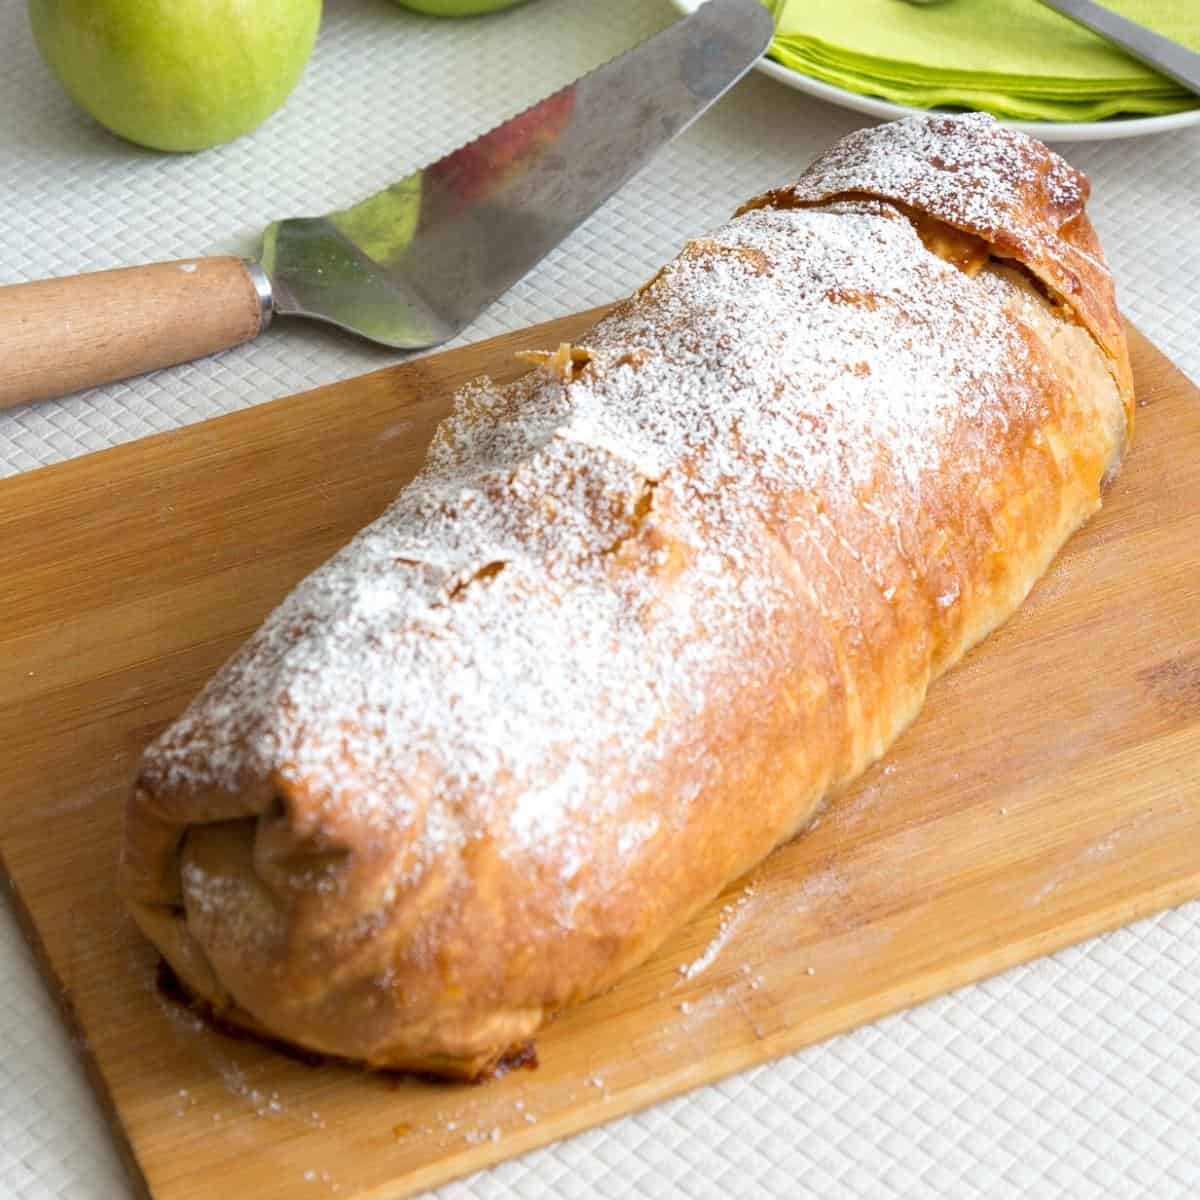 A baked strudel on the table.